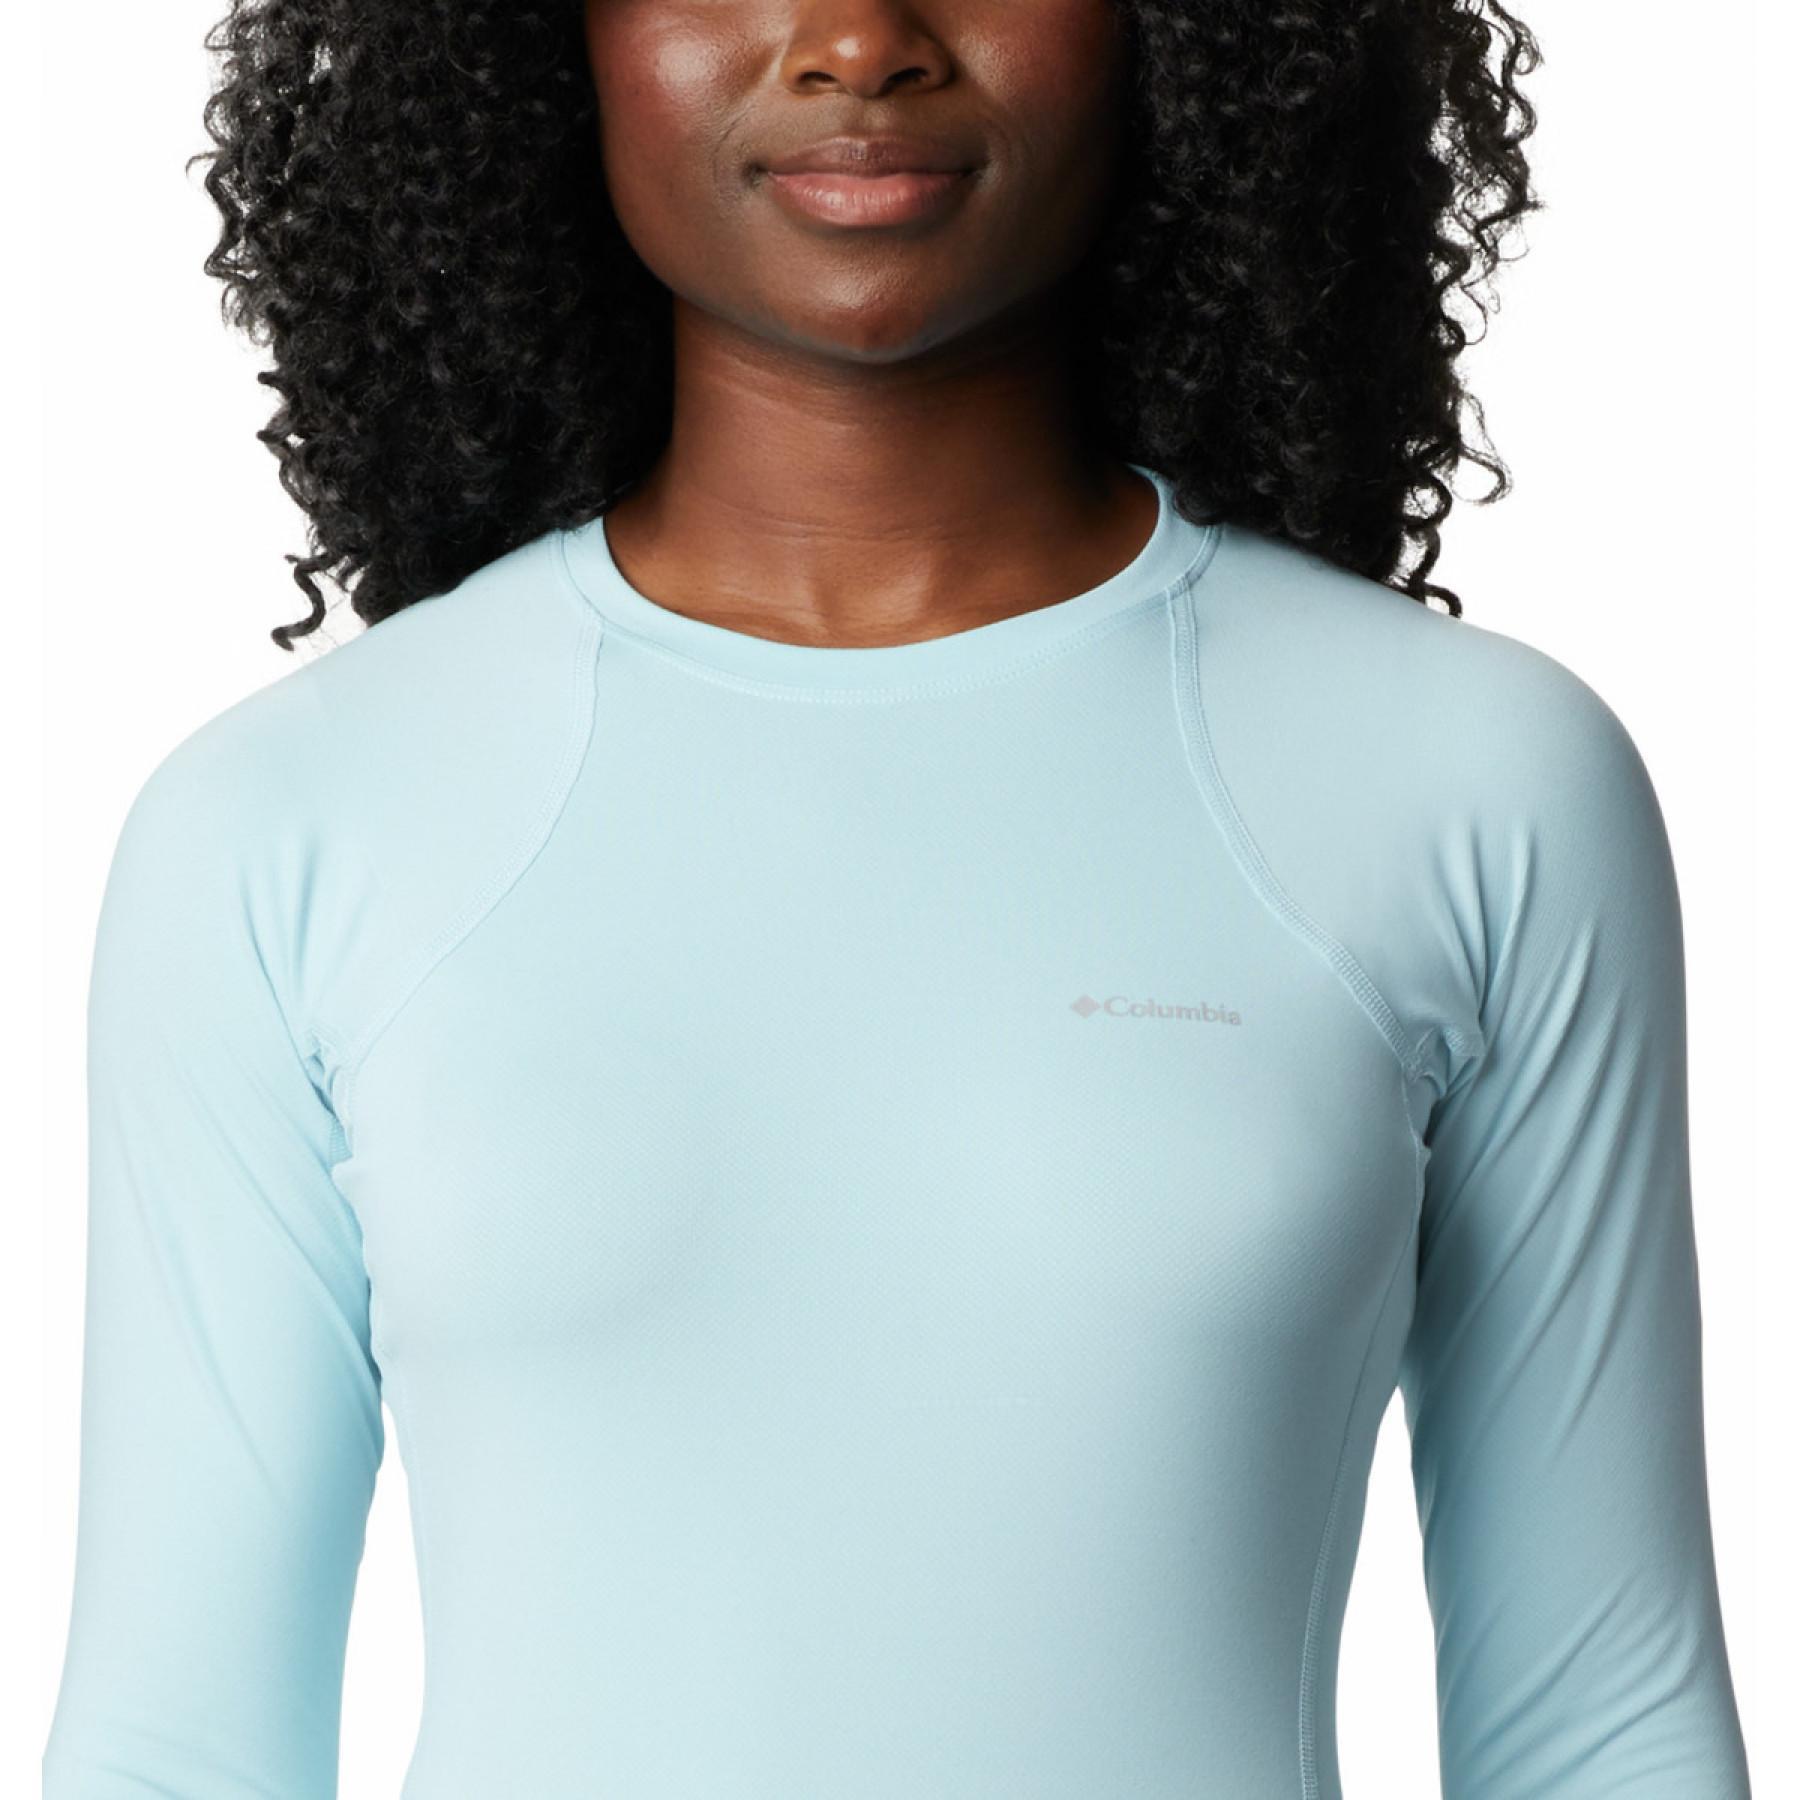 Maillot femme Columbia Midweight Stretch